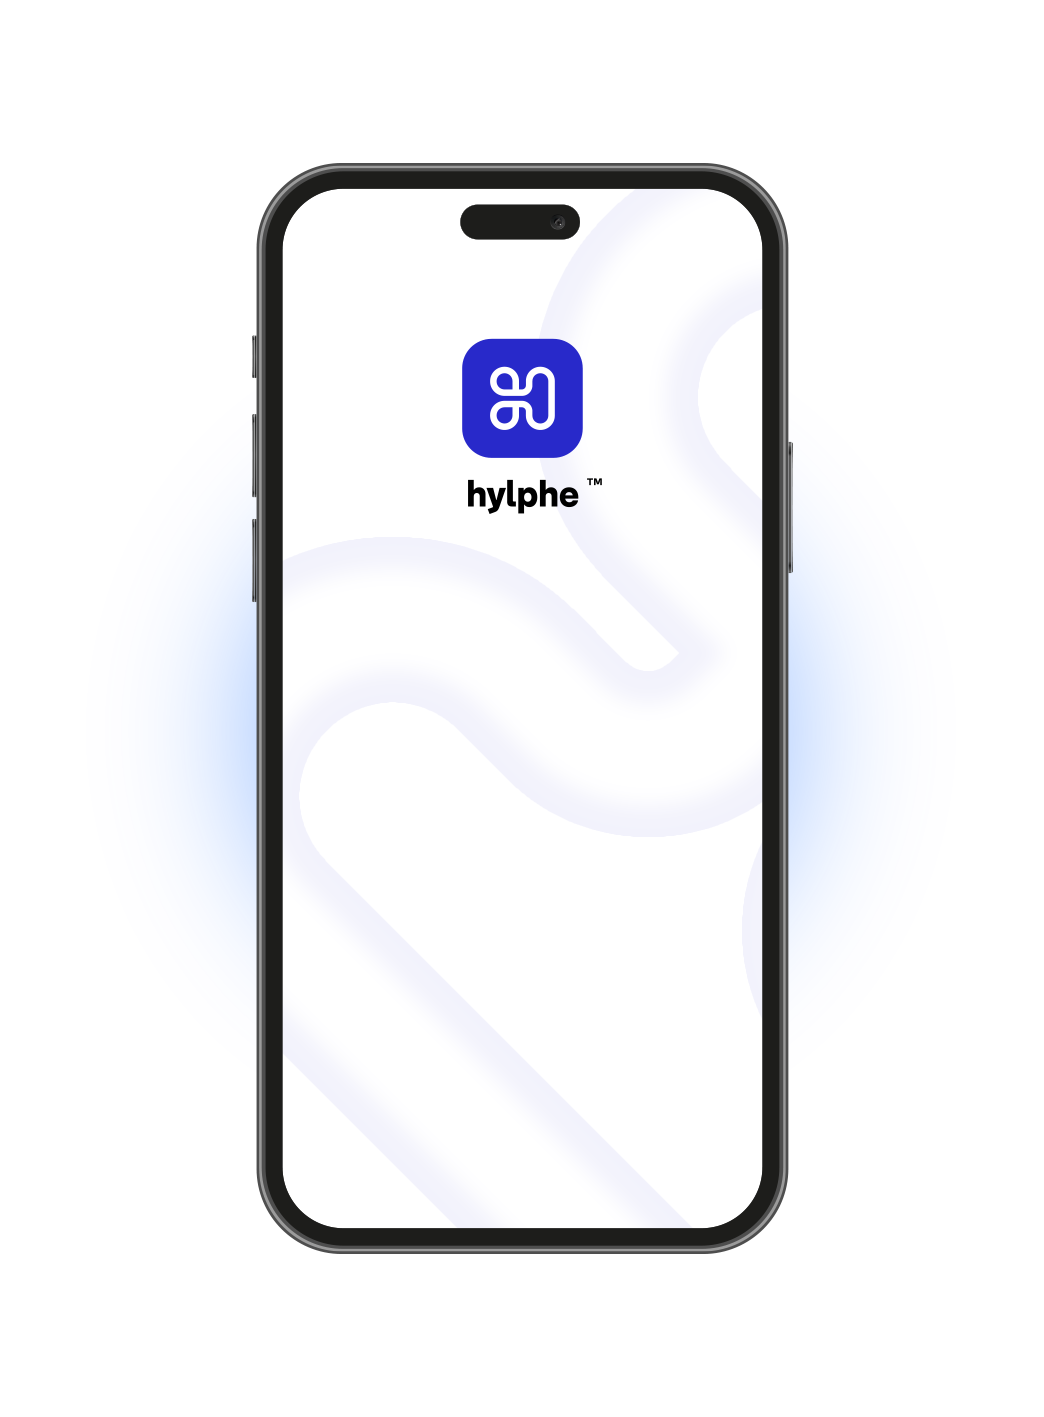 iPhone with Hylphe logo